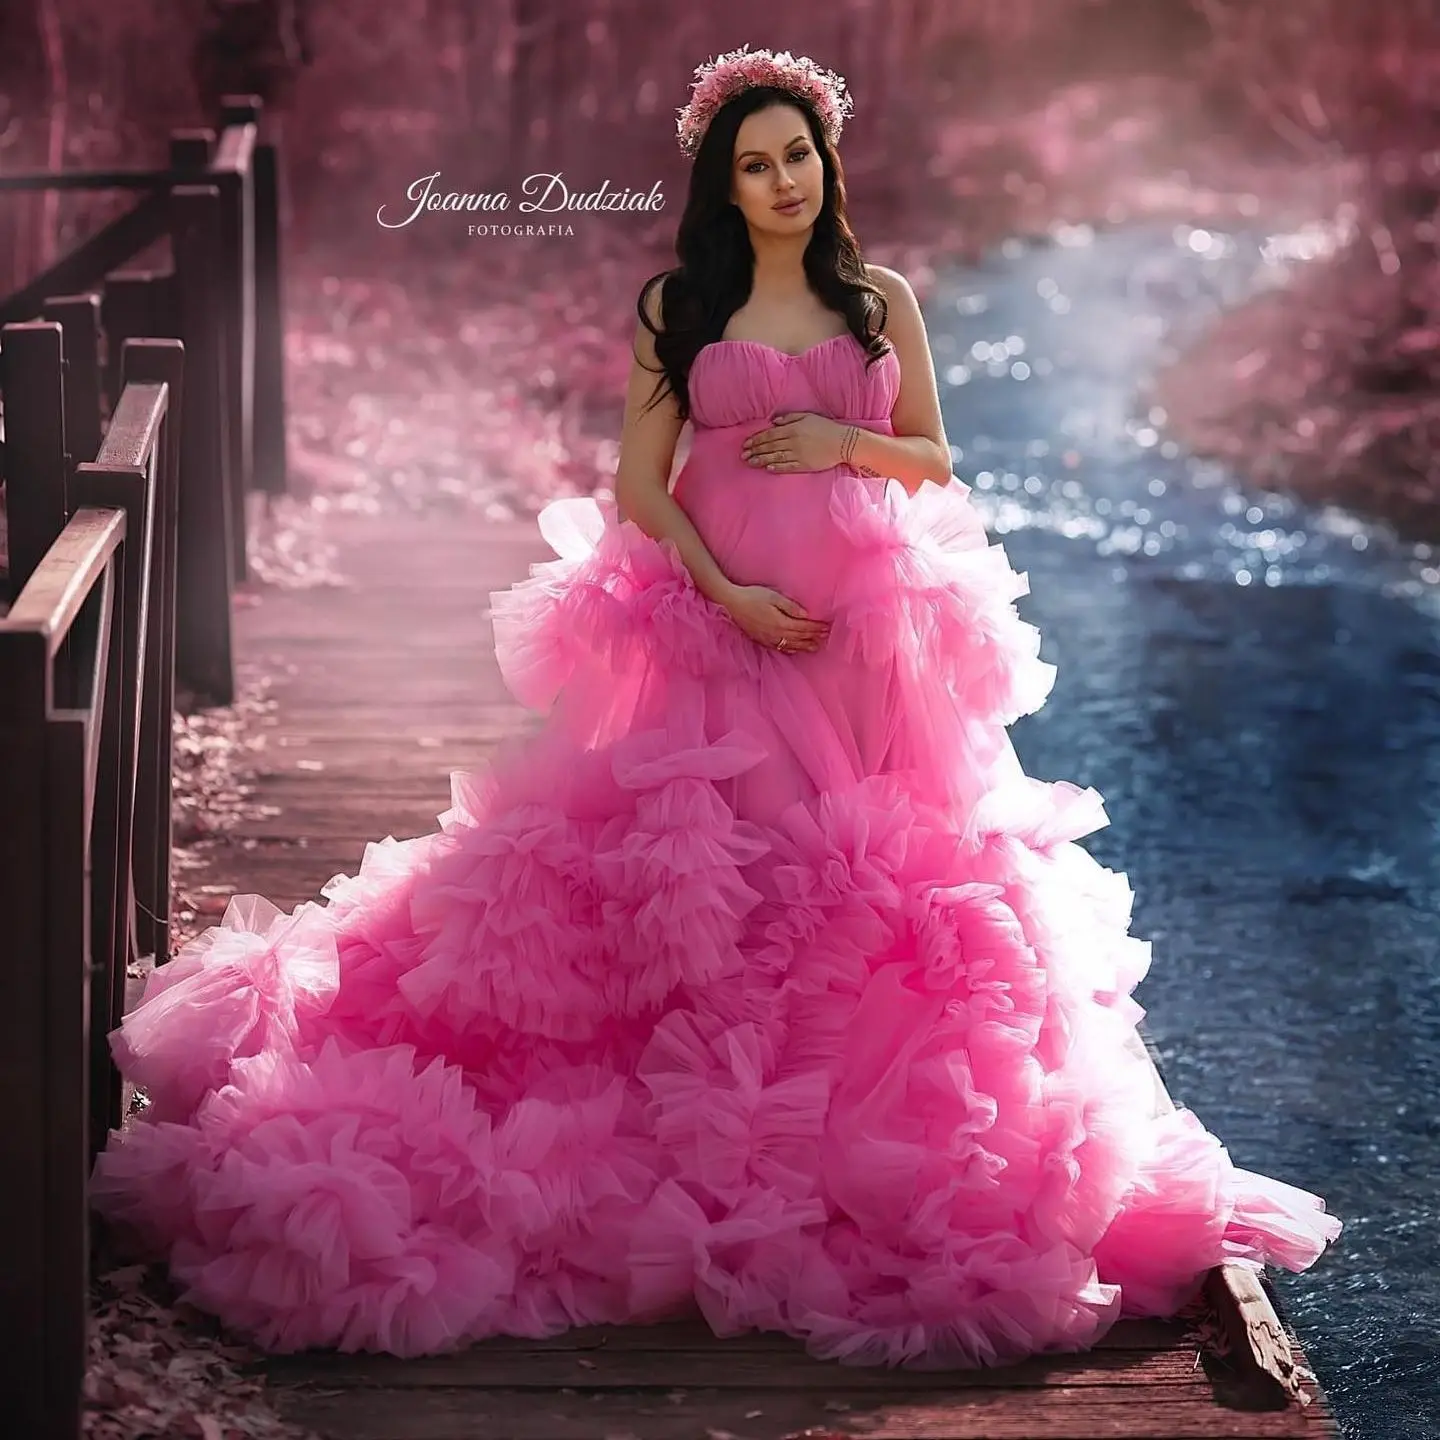 

Hot Pink Maternity Dress for Photoshoot Sweetheart Lush Tulle Prop Pregnancy Babyshower Dress Luxury Bathrobe Gowns